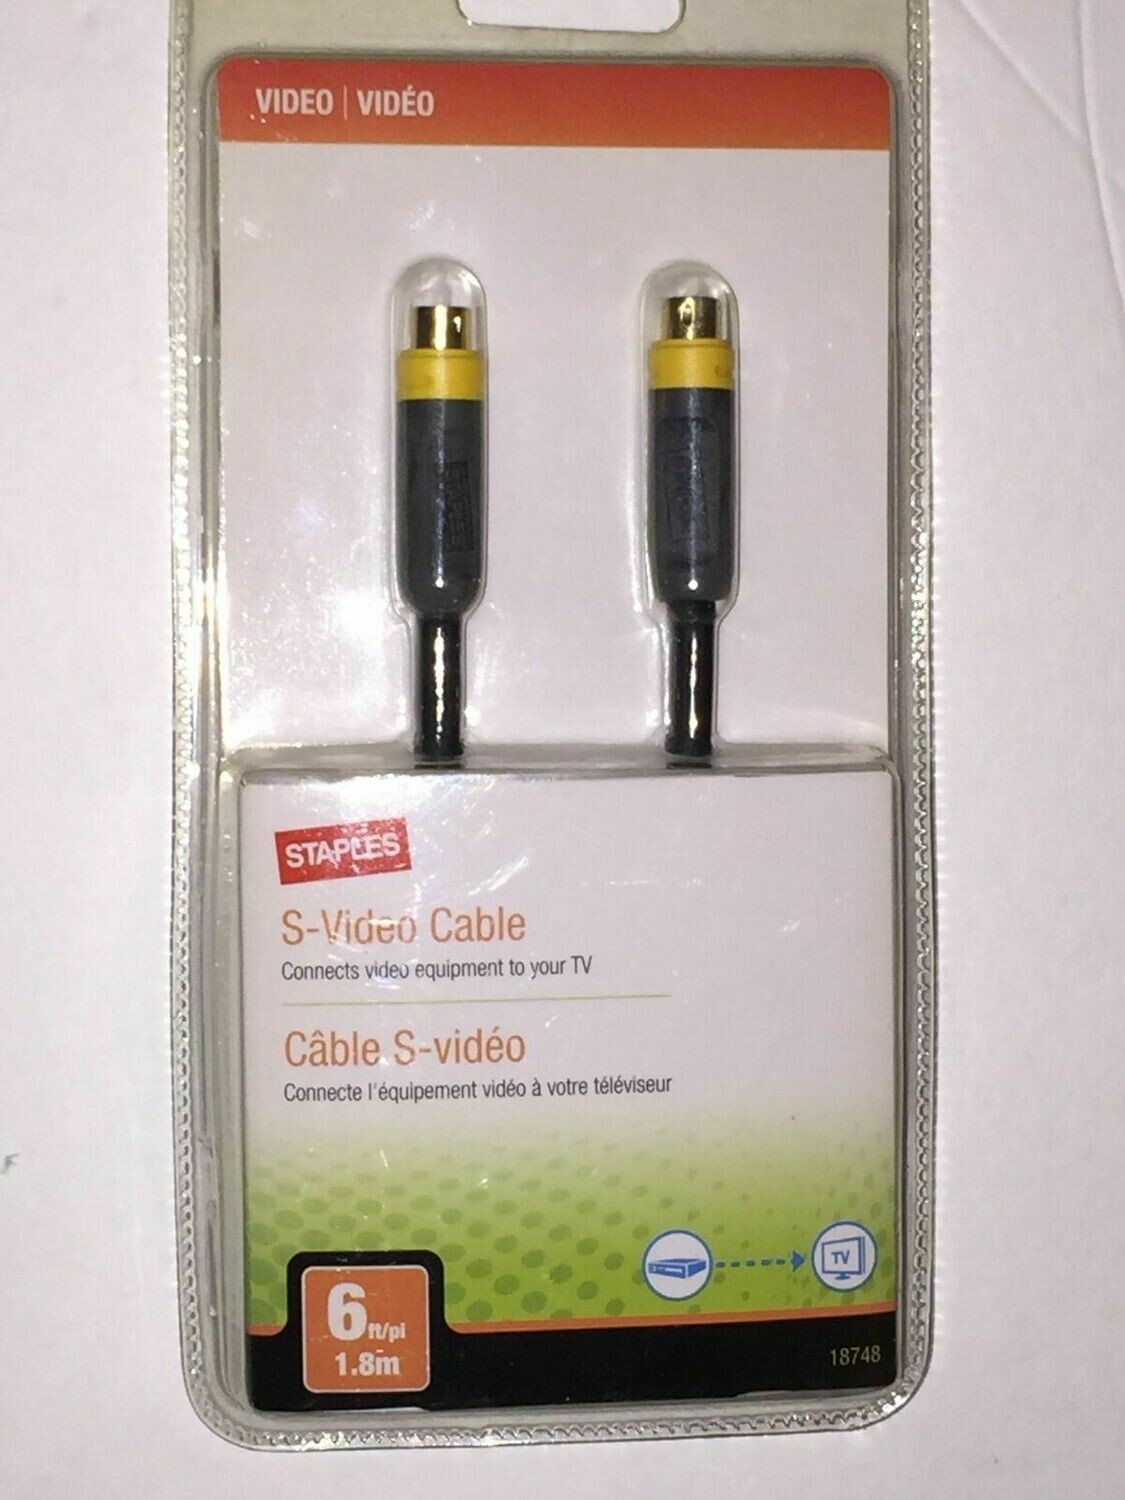 STAPLES - S Video Cable - 6 Ft - Connects Video Equipment to TV 18747 1.8 m